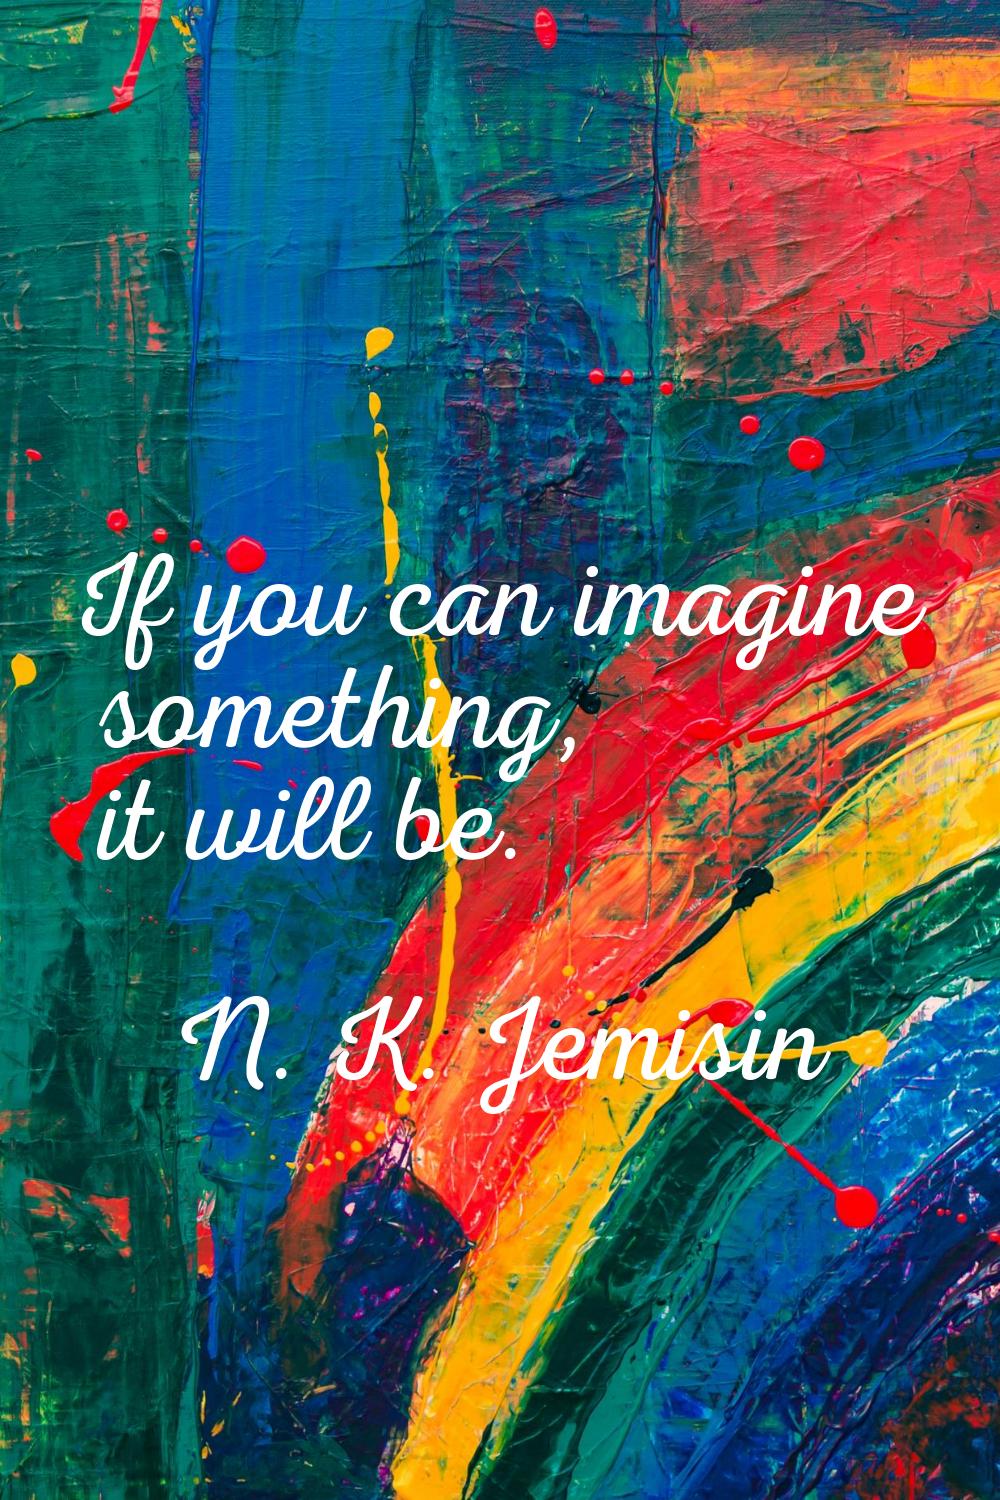 If you can imagine something, it will be.